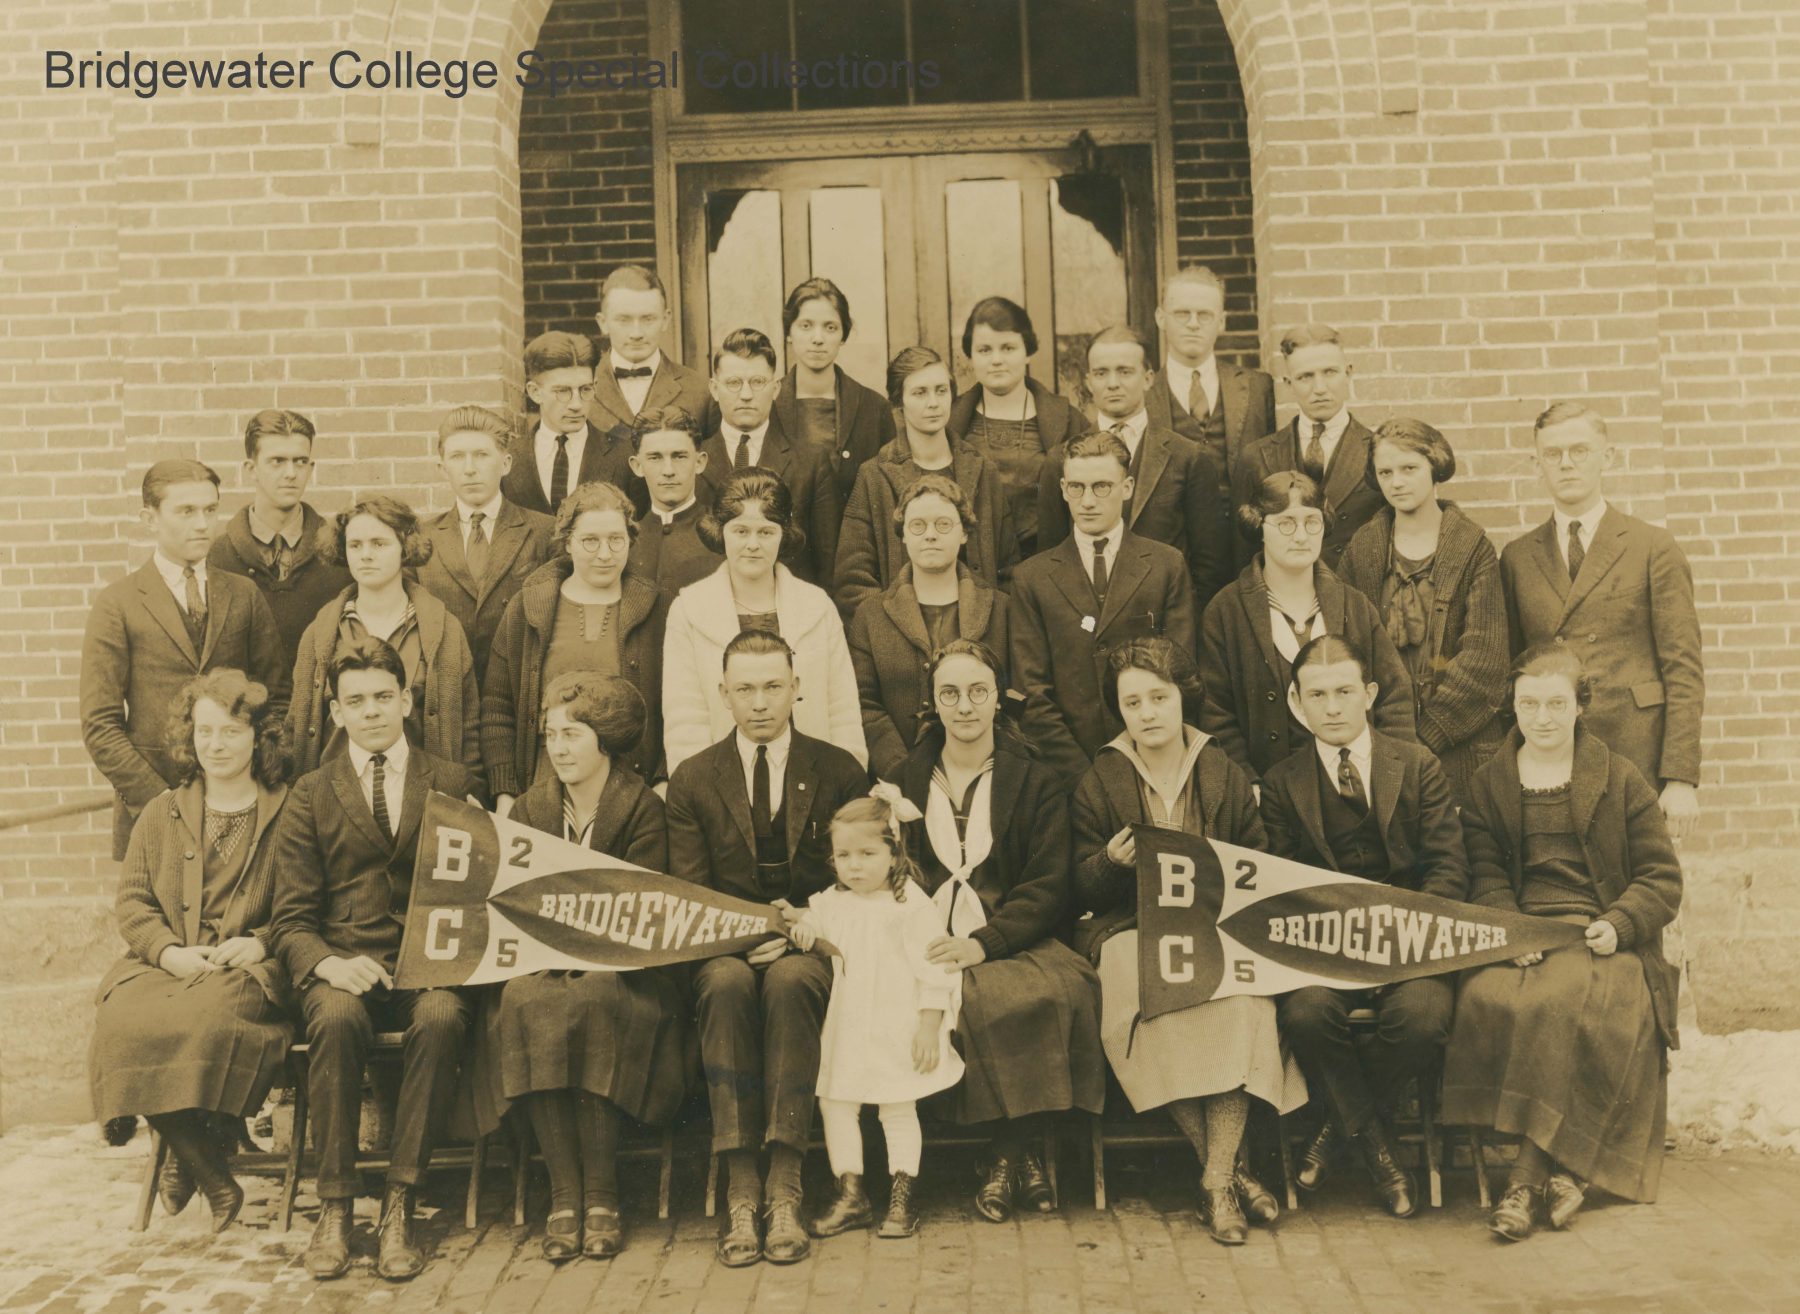 Newlen-Bradford Special Collections at Bridgewater College Presents “The ’20s are Back at Bridgewater” on Display Beginning April 19